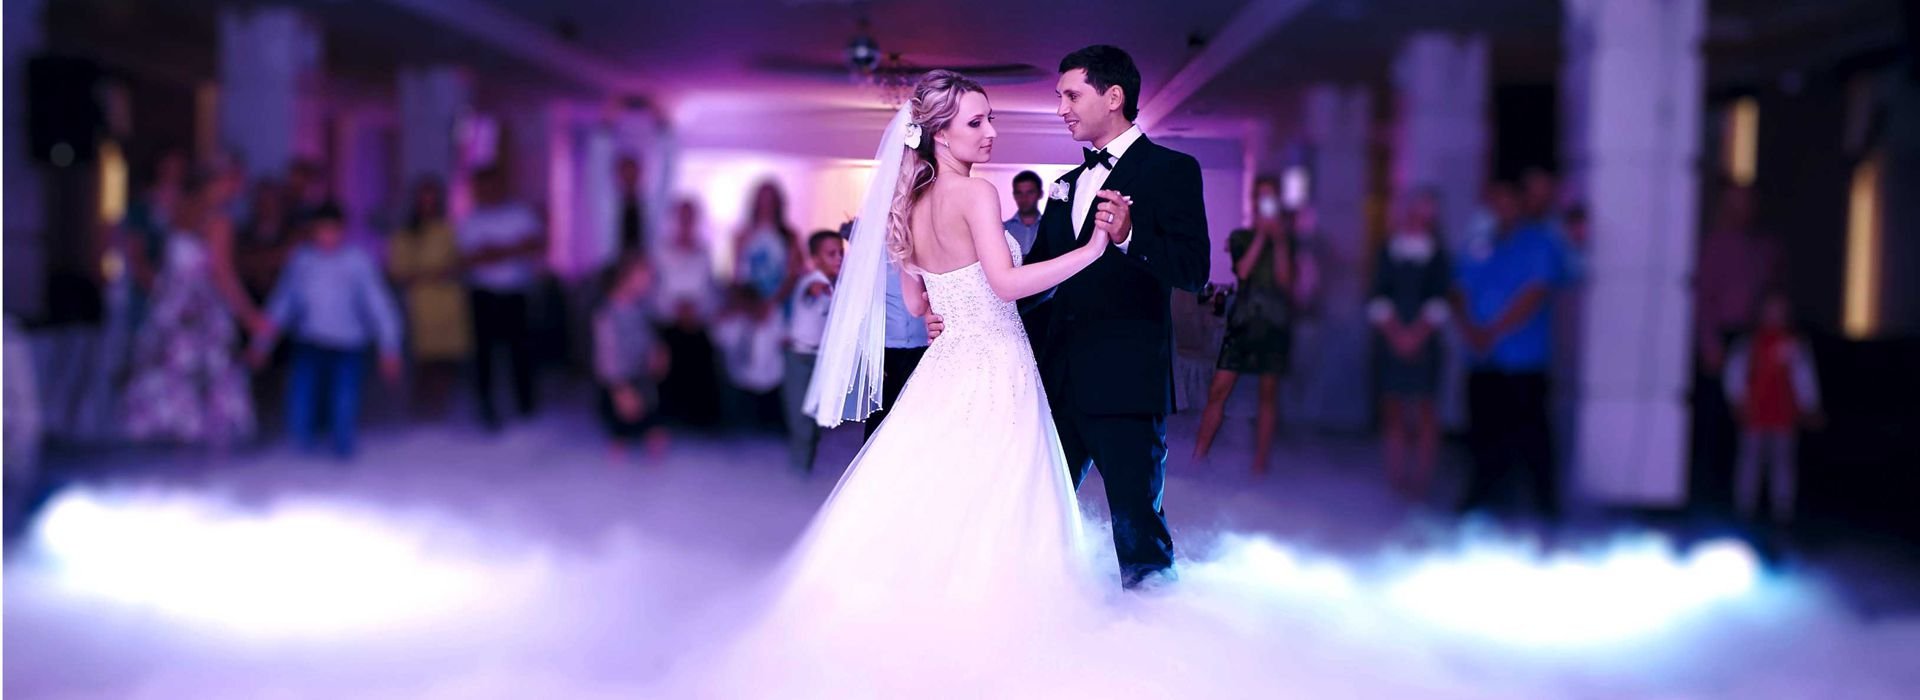 Houston Wedding DJ, DJs in Houston, Bride and Groom, Dancing On A Cloud for their First Dance at their Wedding, Houston Quinceañera DJ, Father Daughter Dance, Awesome Music Entertainment, Awesome Event Pros, AME DJs, Sonido DJ Sammy de Houston